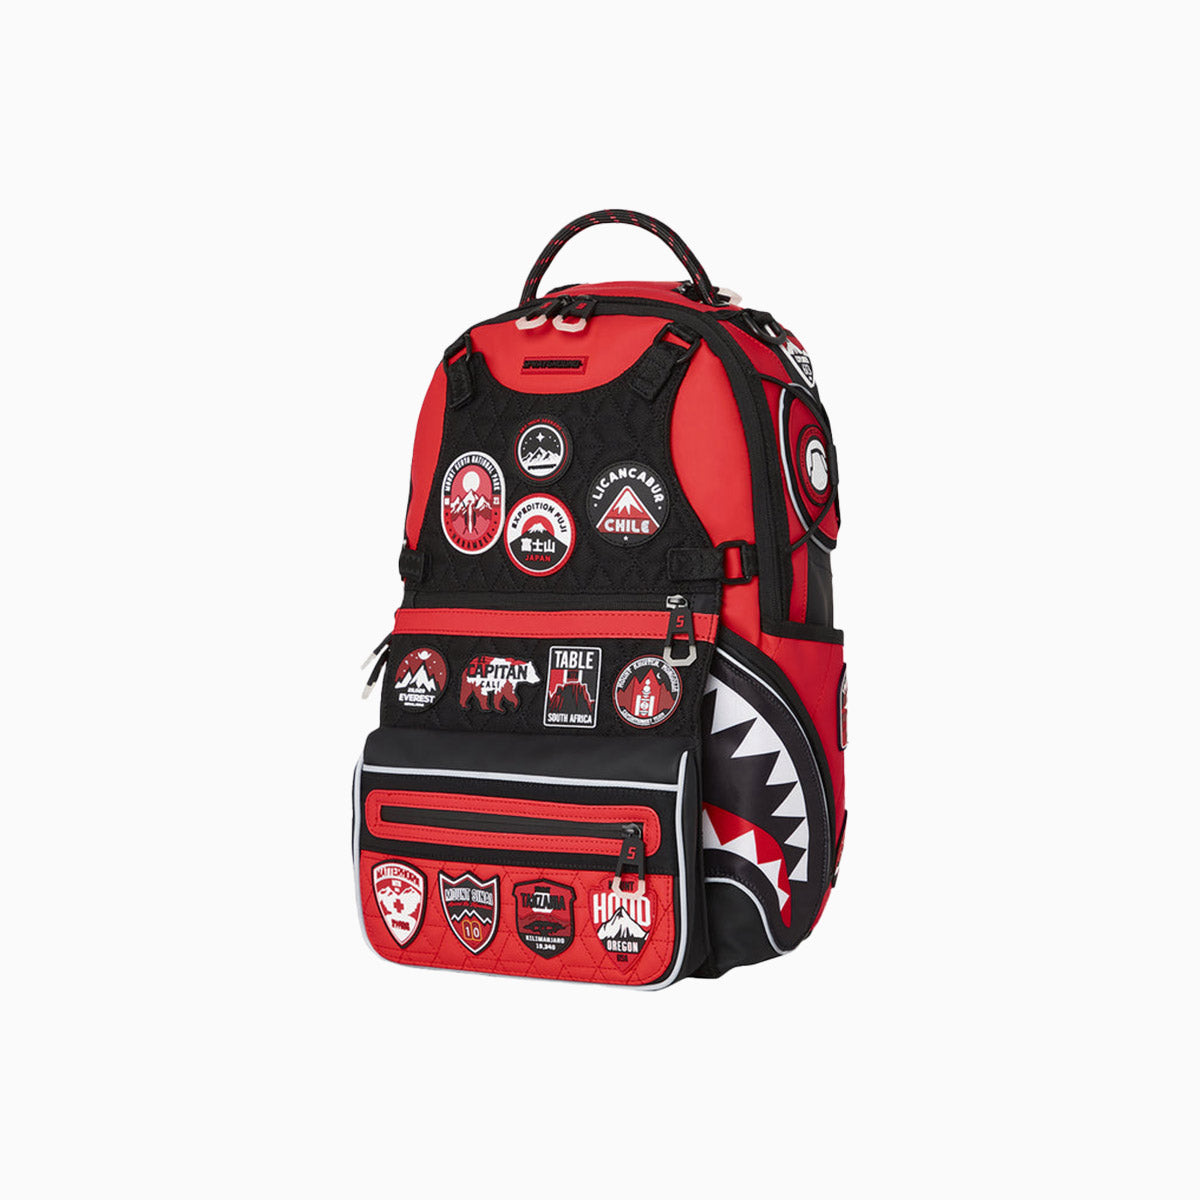 Expedition Red Backpack